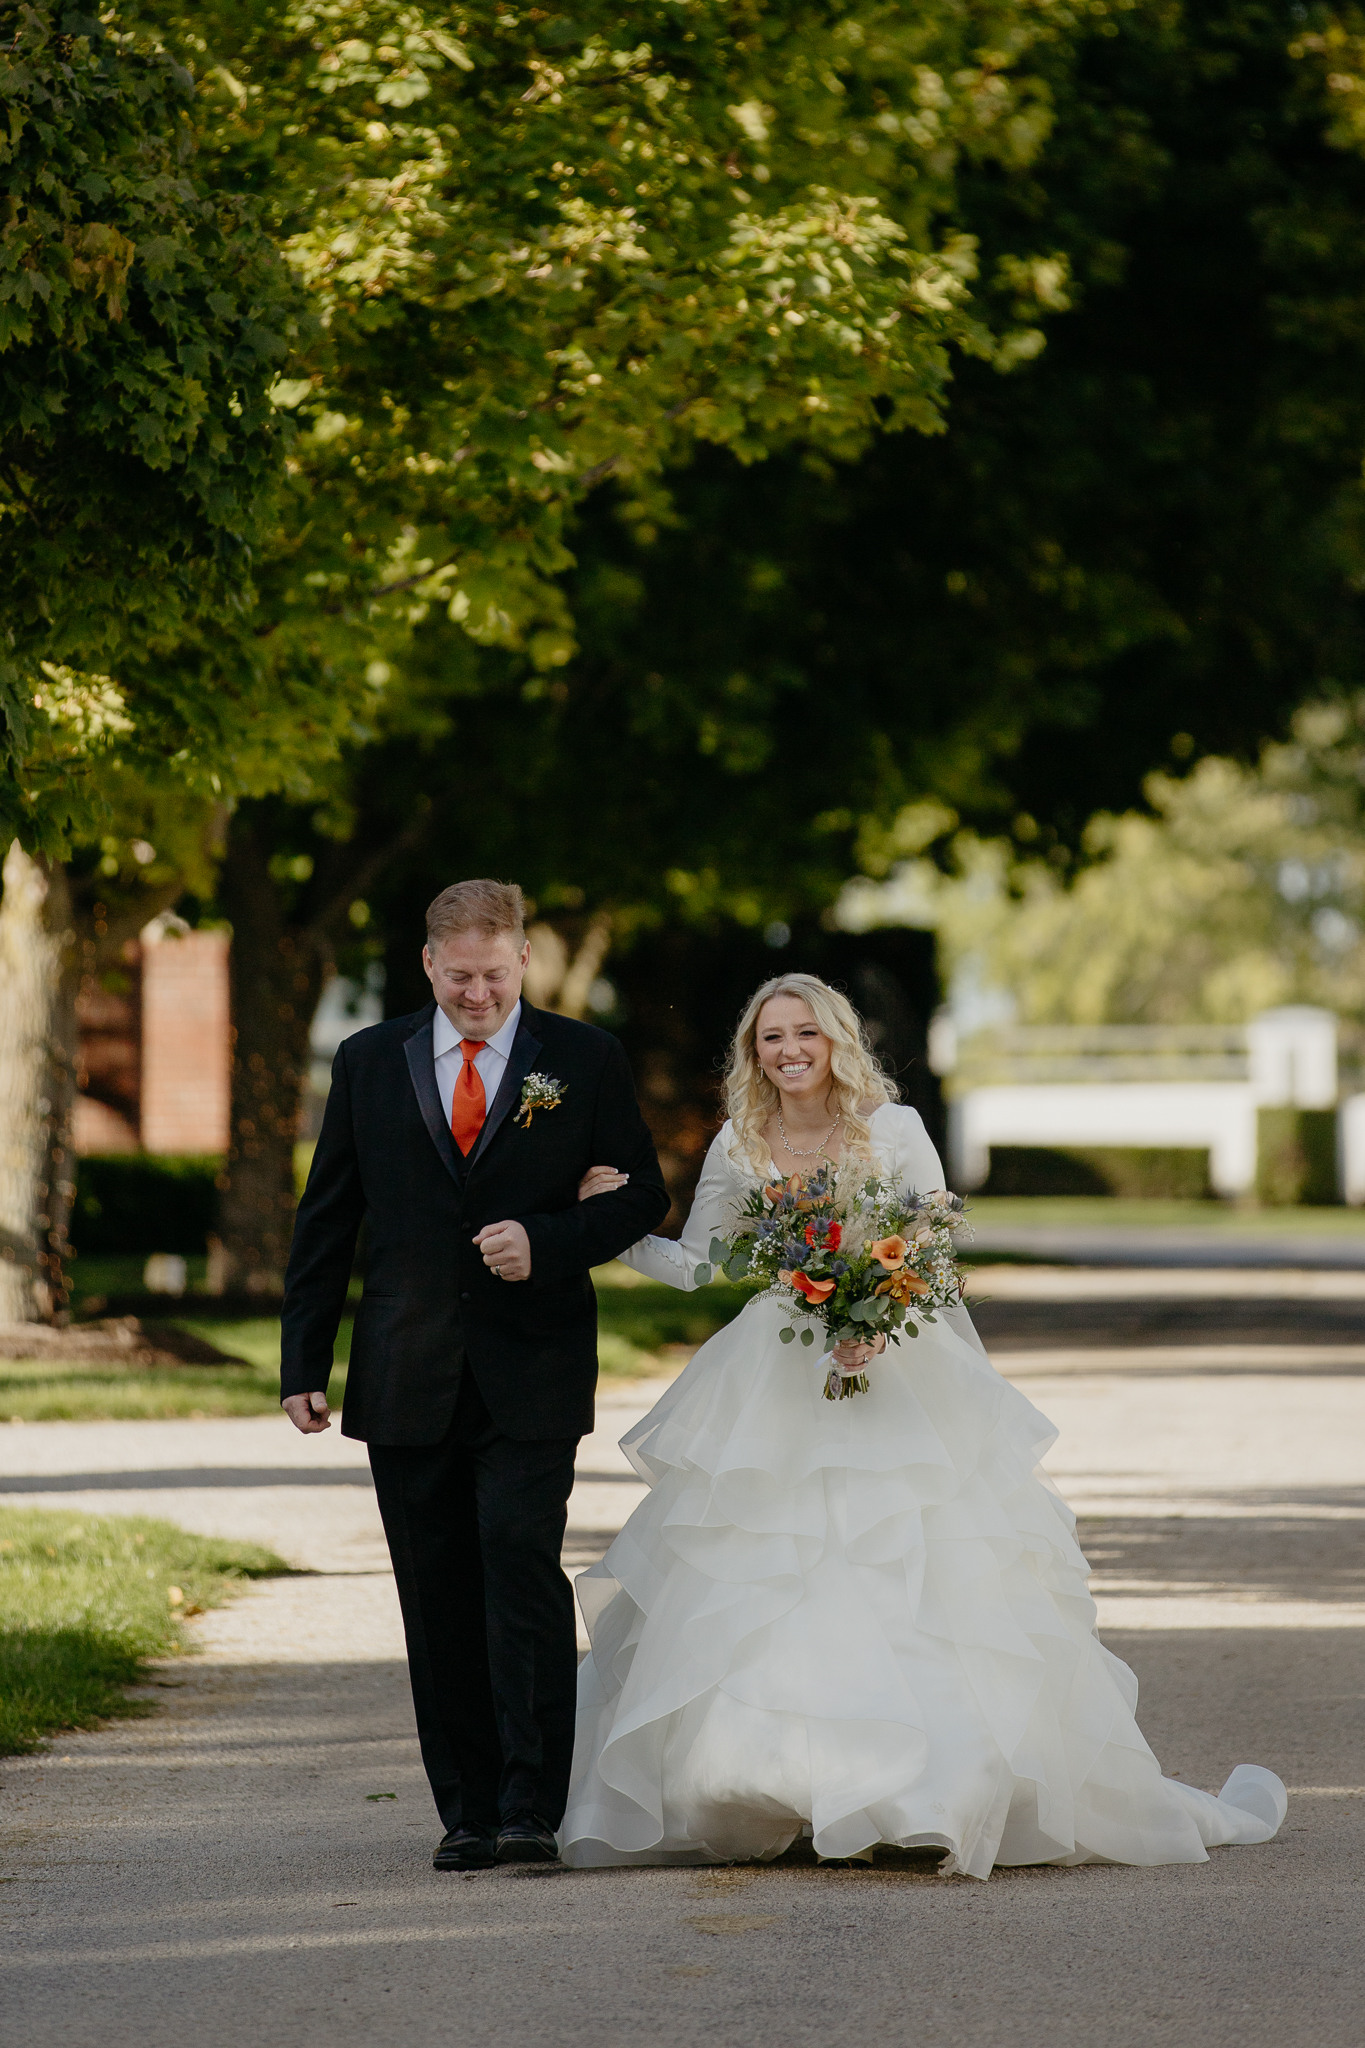 Bride in wedding dress walking down tree lined driveway arm in arm with her father